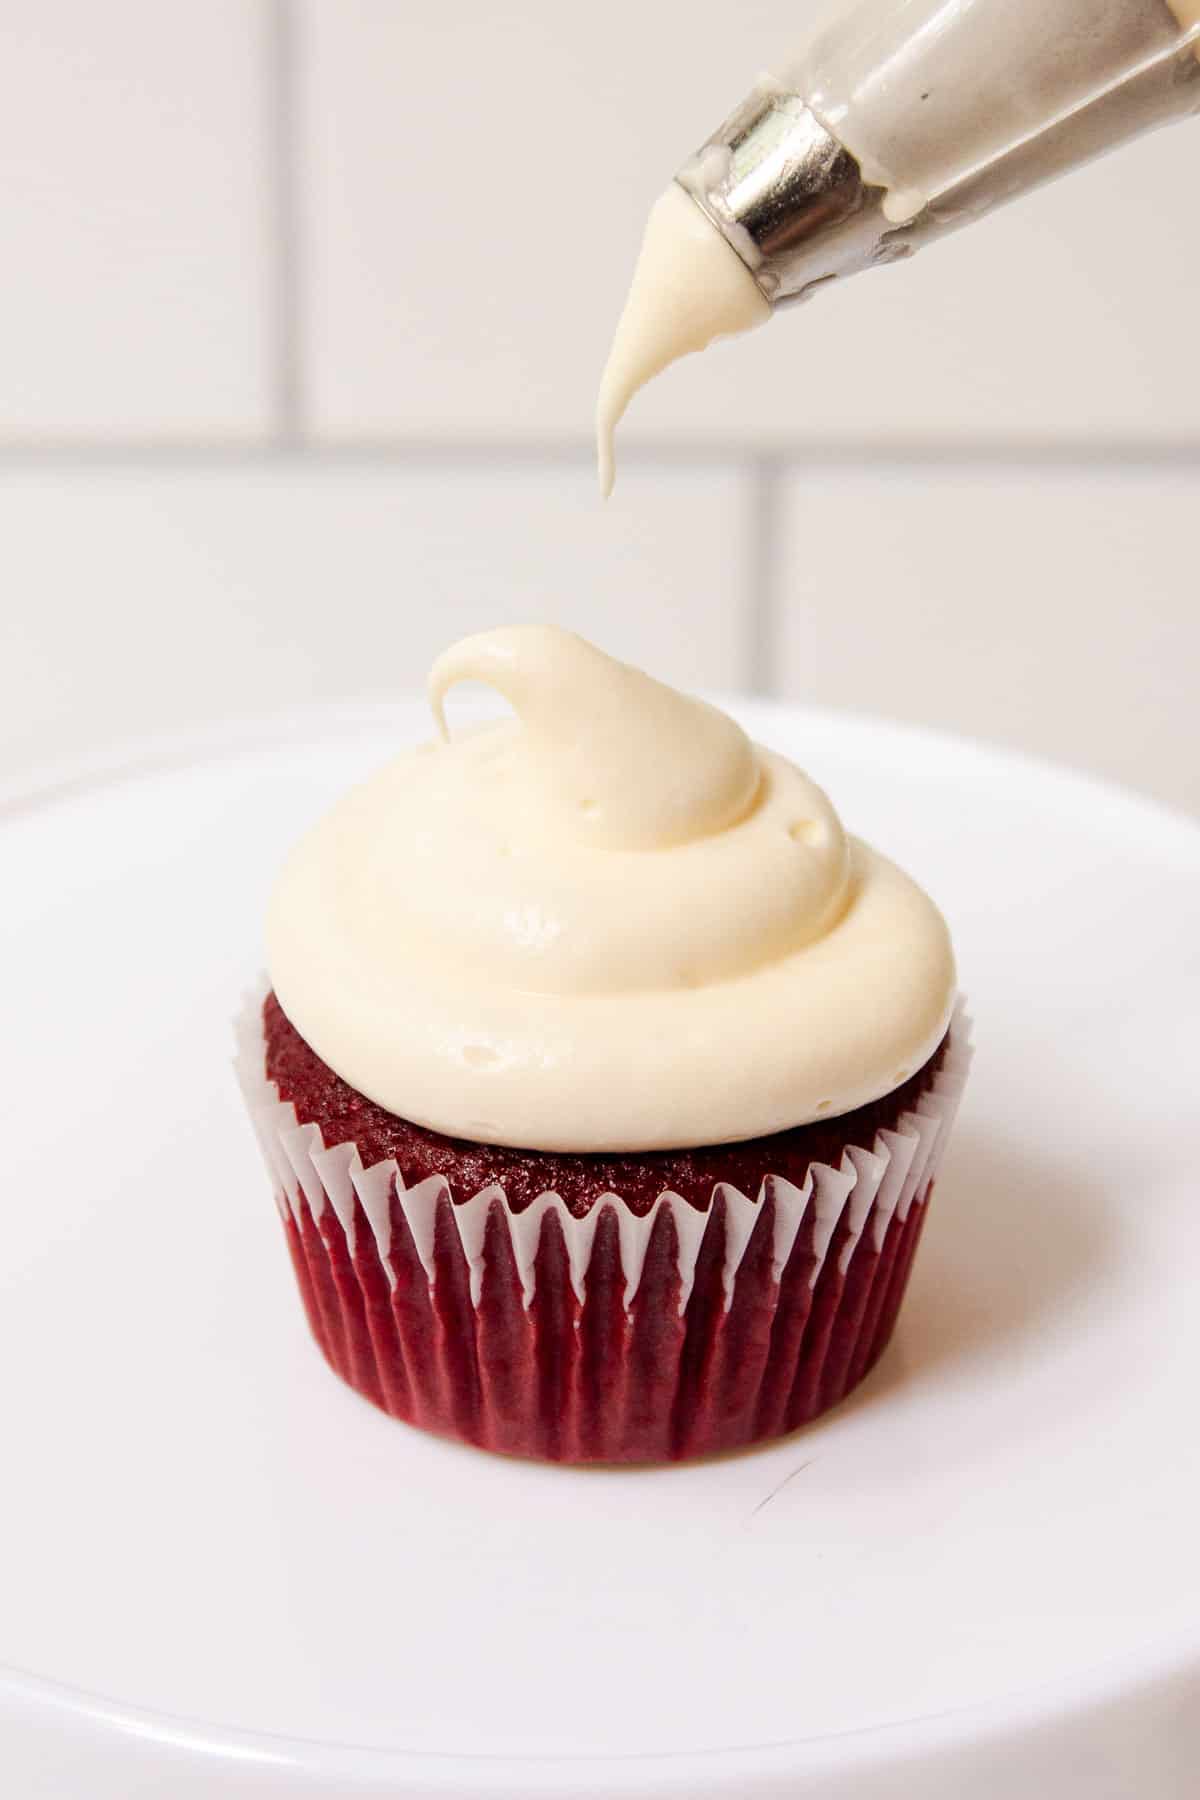 Cool Whip Cream Cheese Frosting being piped onto a red velvet cupcake with a 1A decorating tip